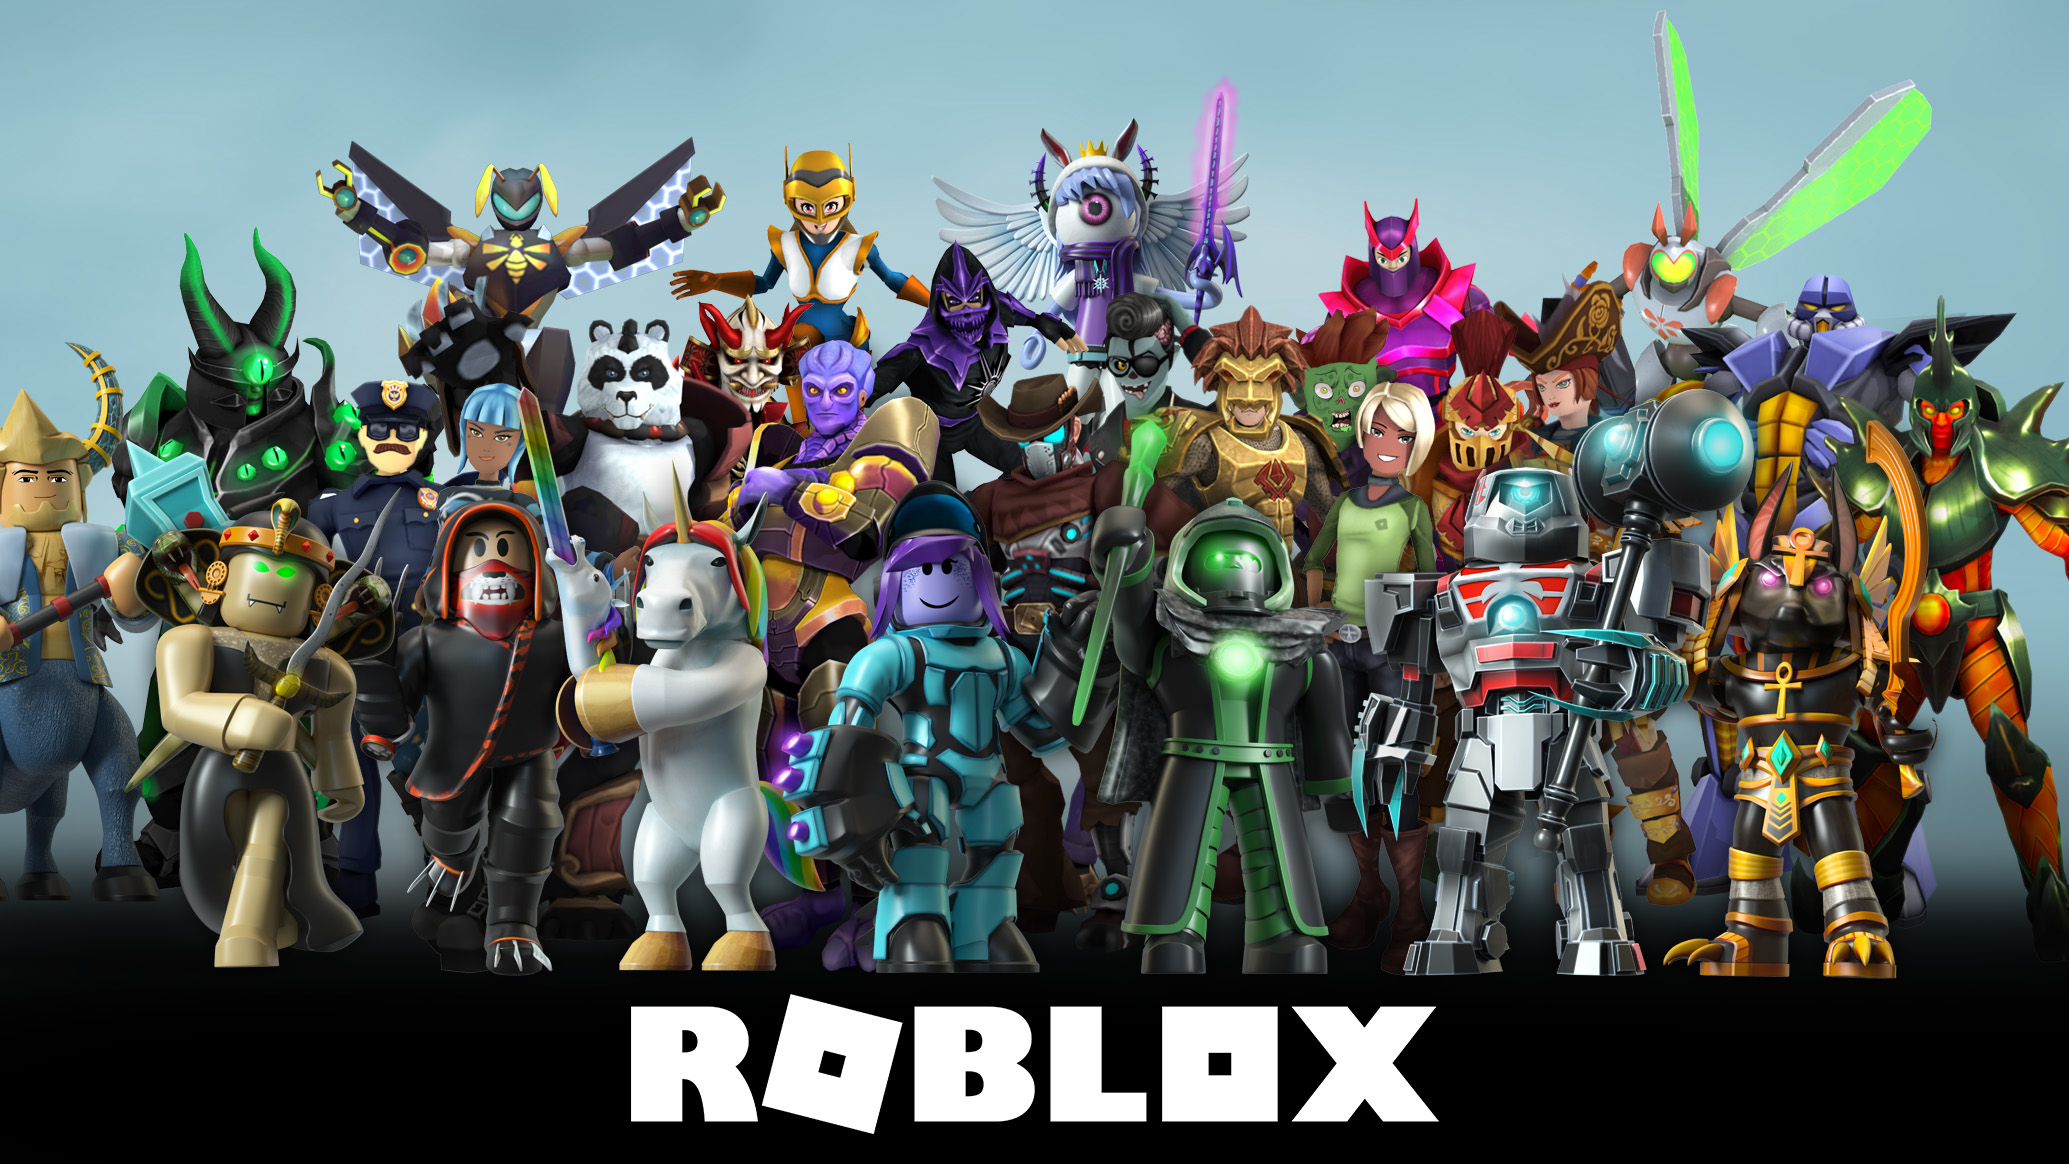 Roblox stock drops on widening losses in Q3, but other growth